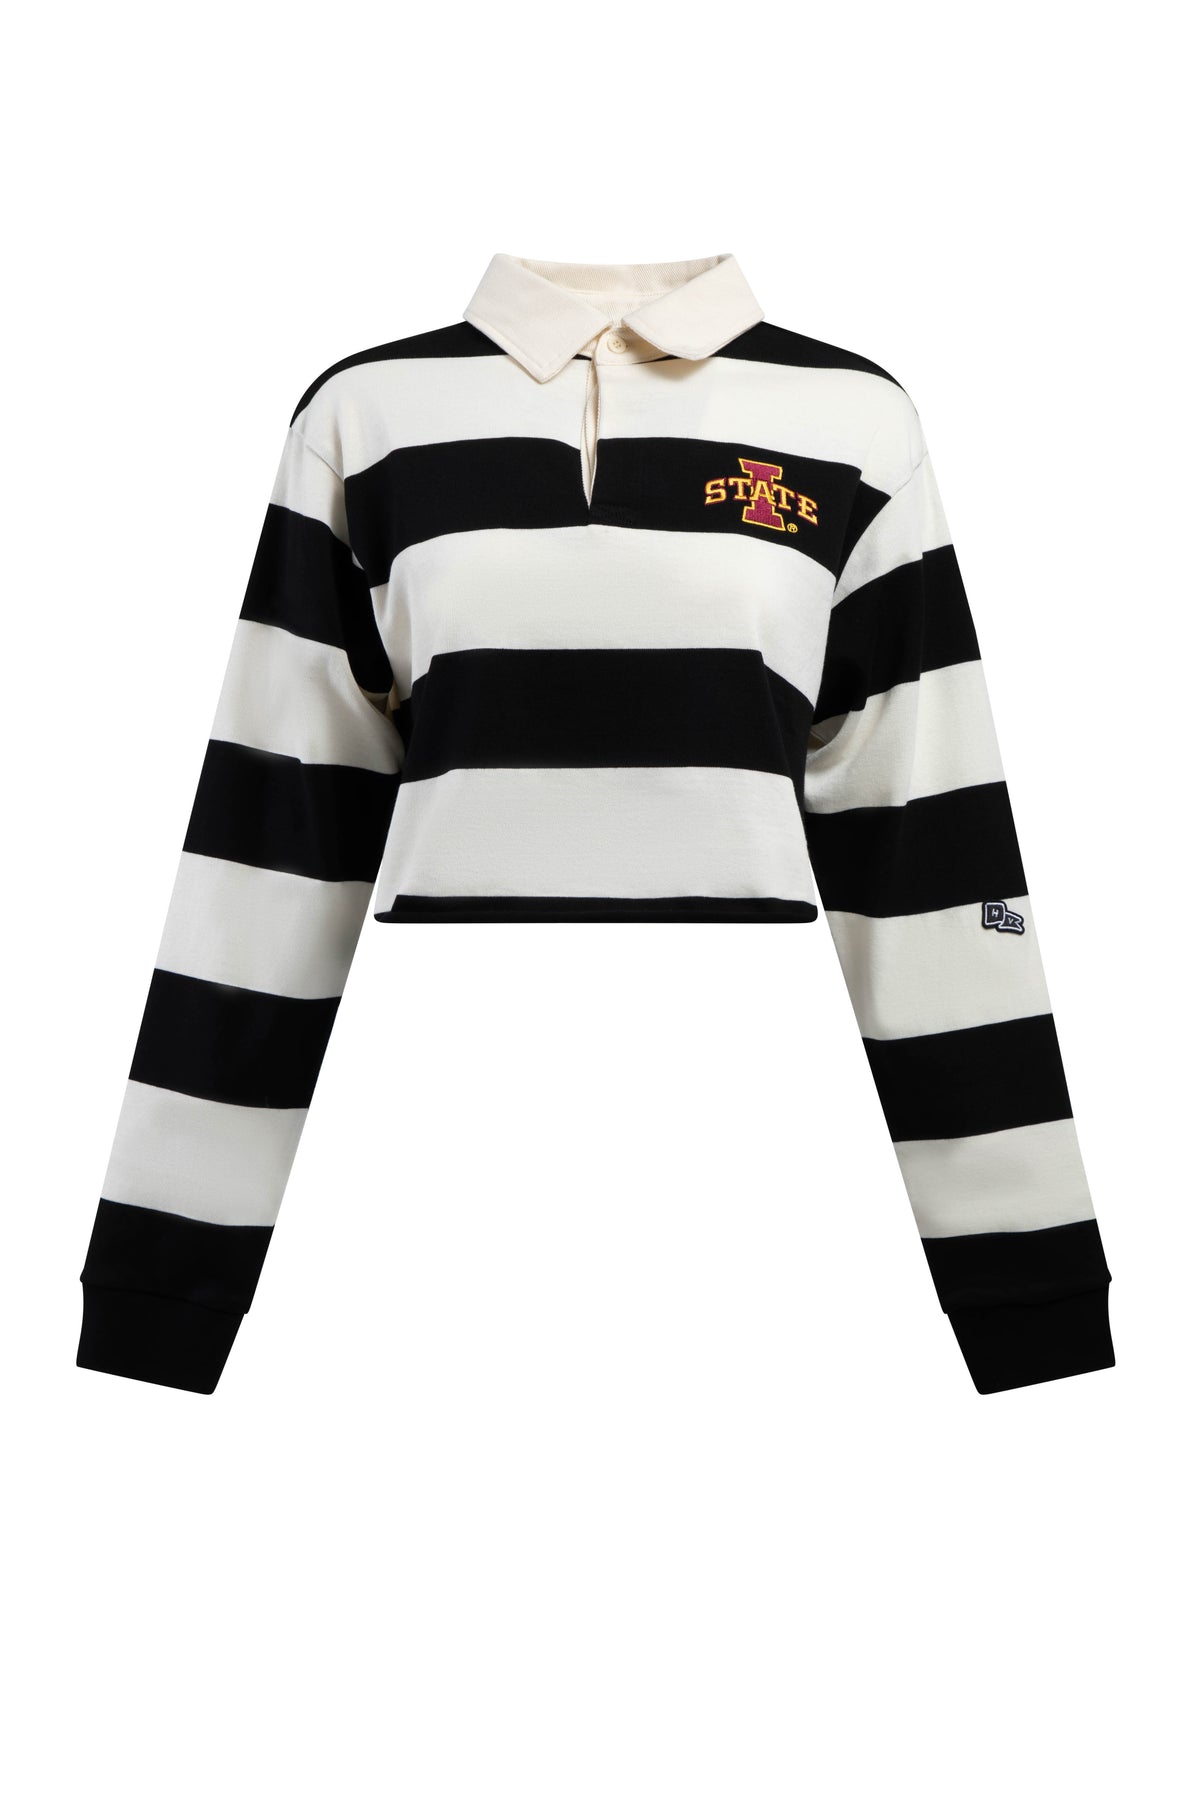 Iowa State Rugby Top